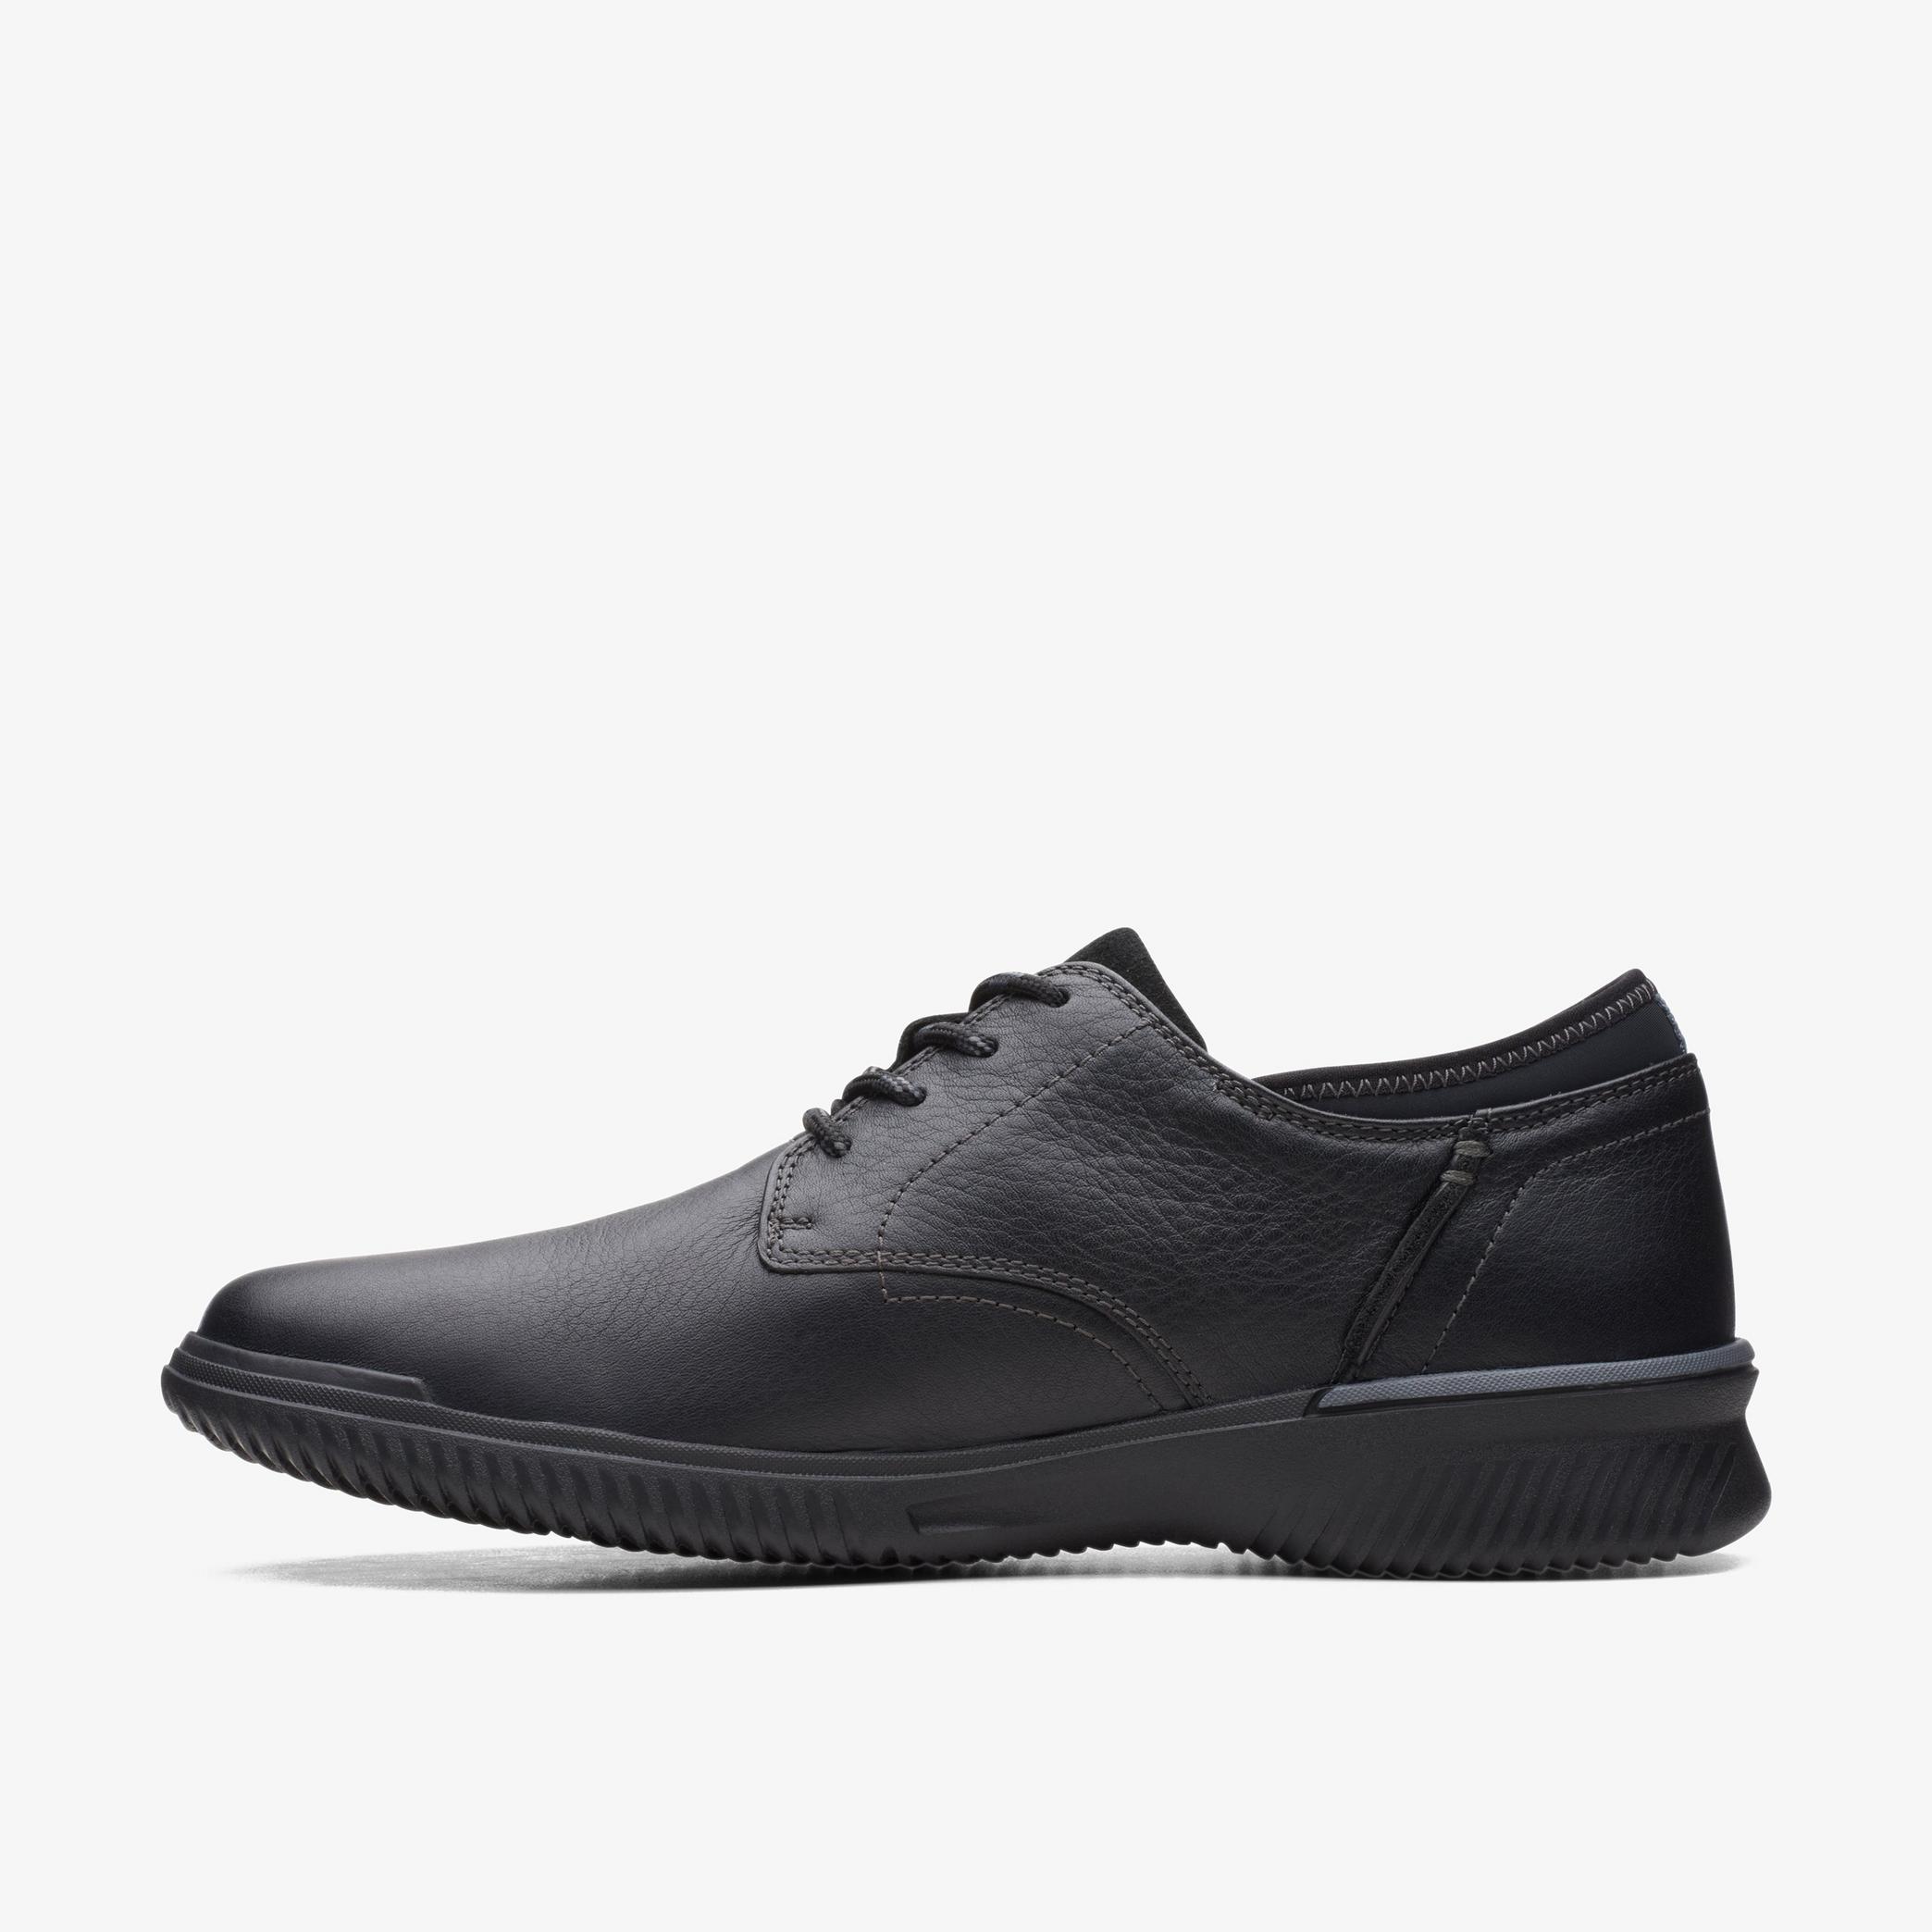 Donaway Plain Black Leather Shoes, view 2 of 6